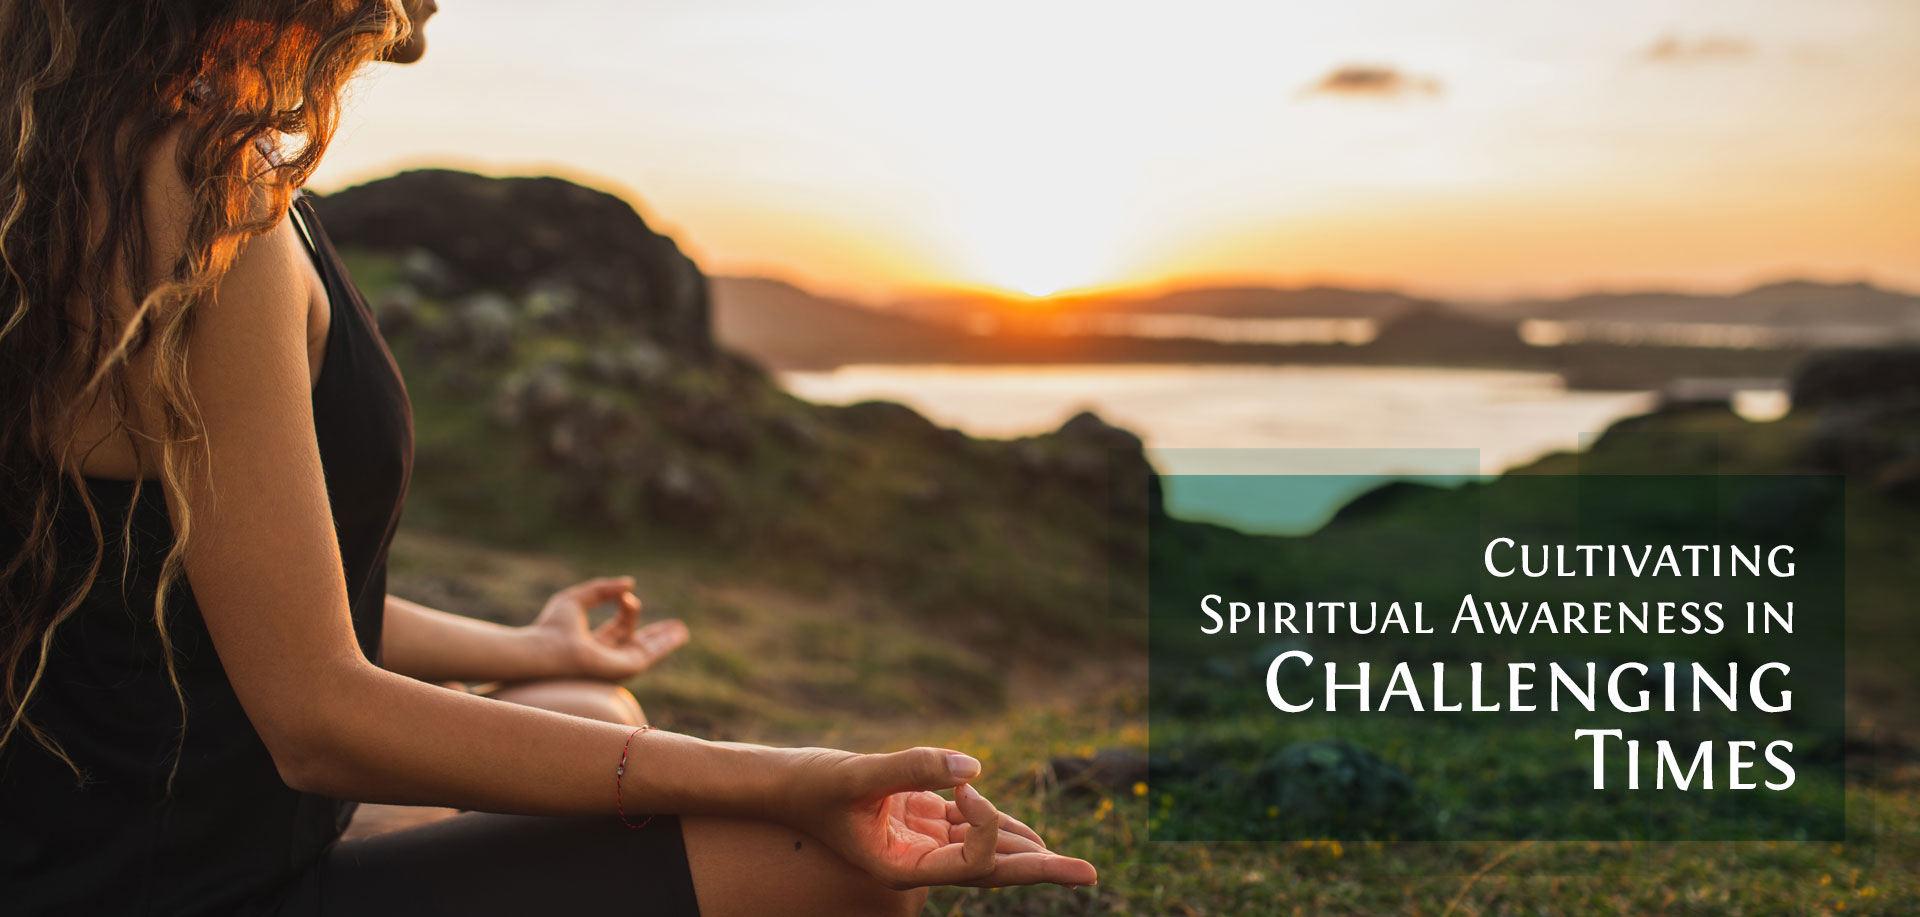 woman meditating with text Cultivating Spiritual Awareness in Challenging Times